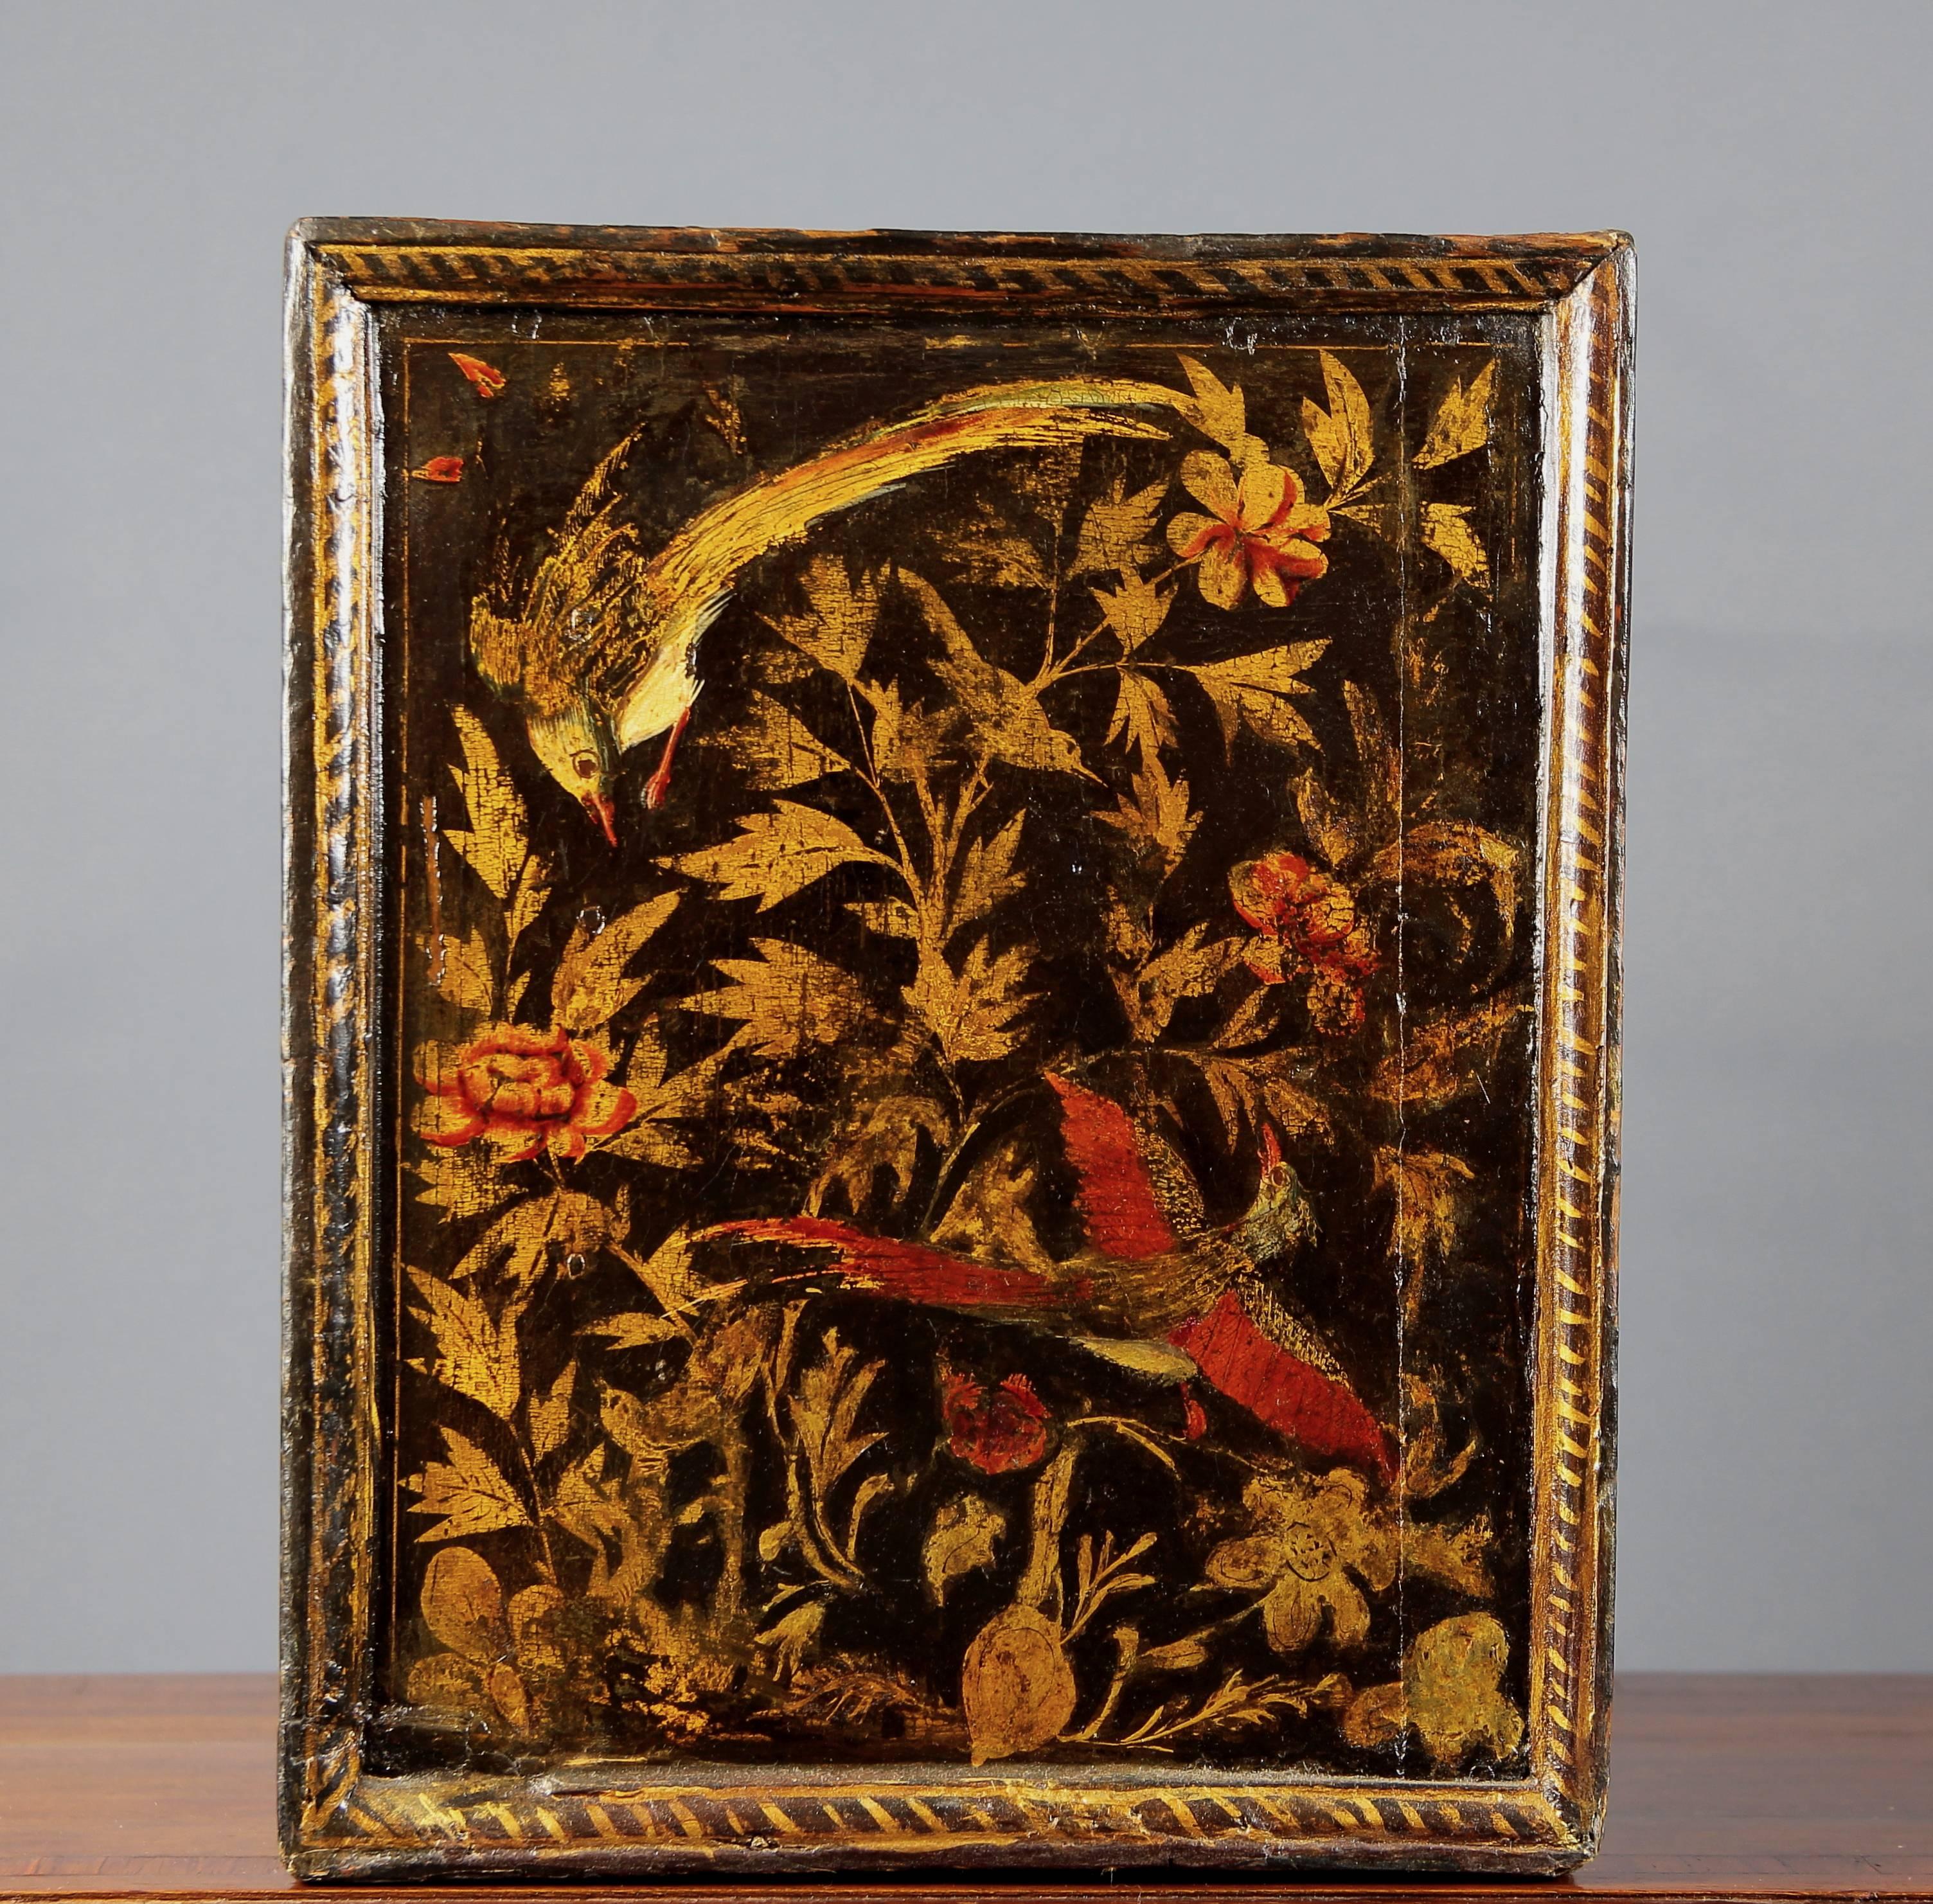 16th-17th century Portuguese commissioned oriental lacquered table cabinet.
Sinde.
Box with ten different sized drawers. Decorated with birds and floral elements. Lacquered and painted,
Pakistan, 16th-17th century.
 